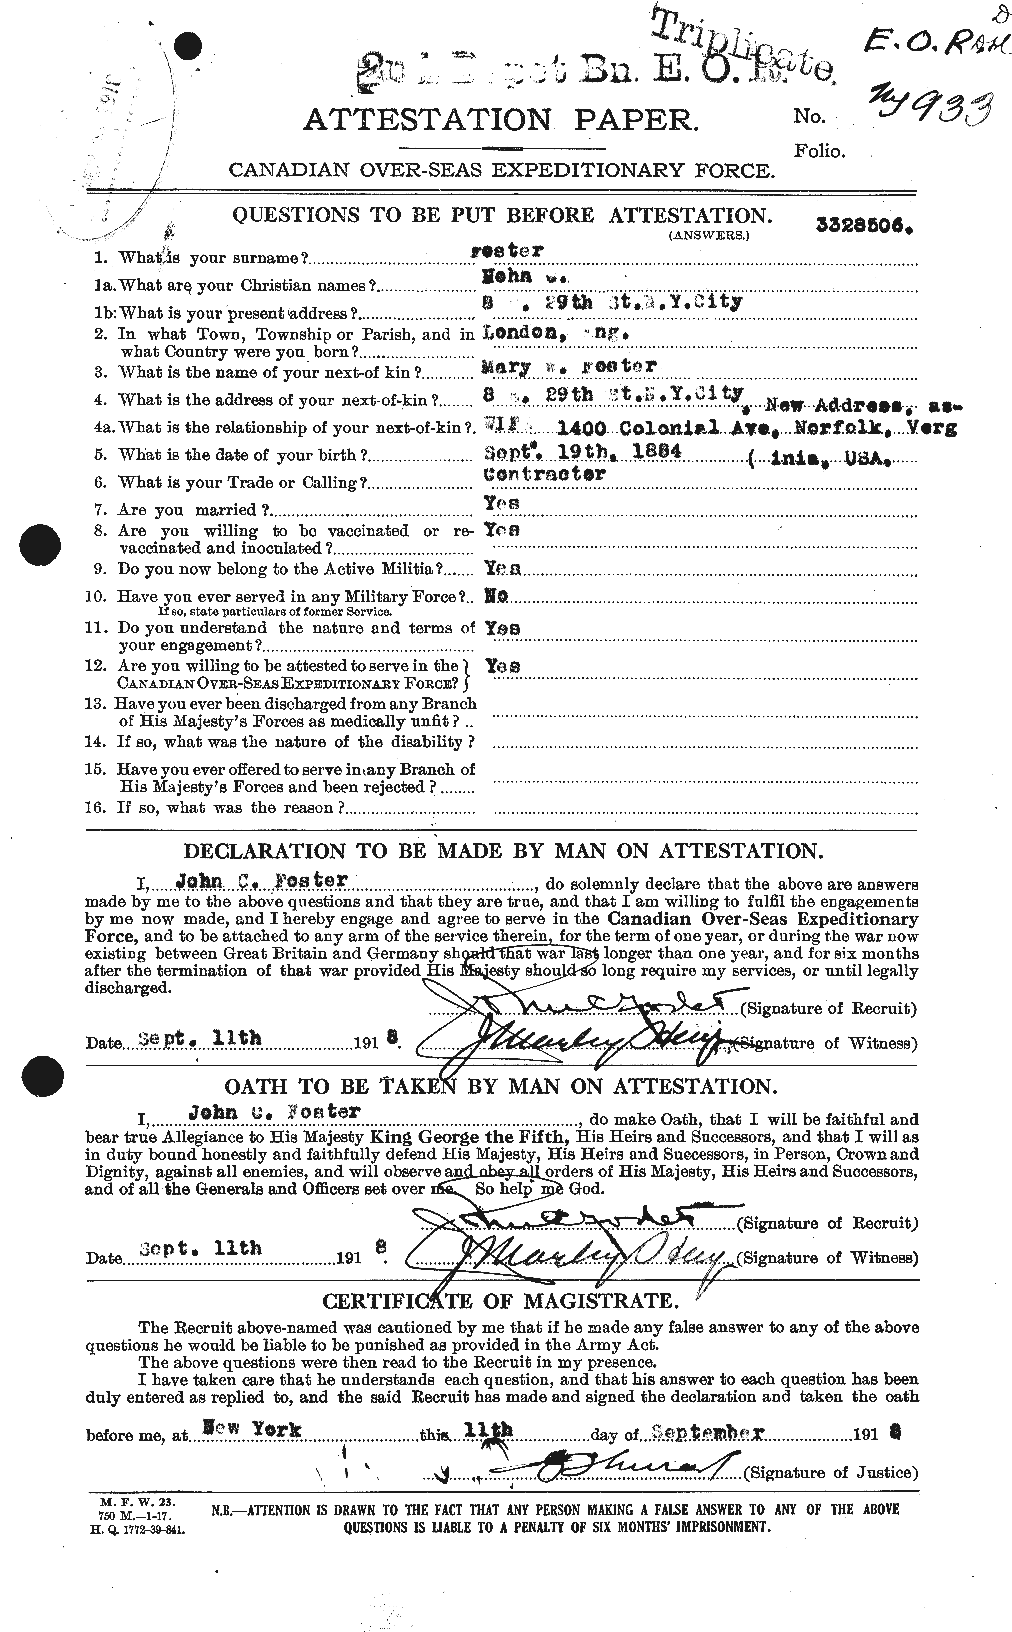 Personnel Records of the First World War - CEF 333356a